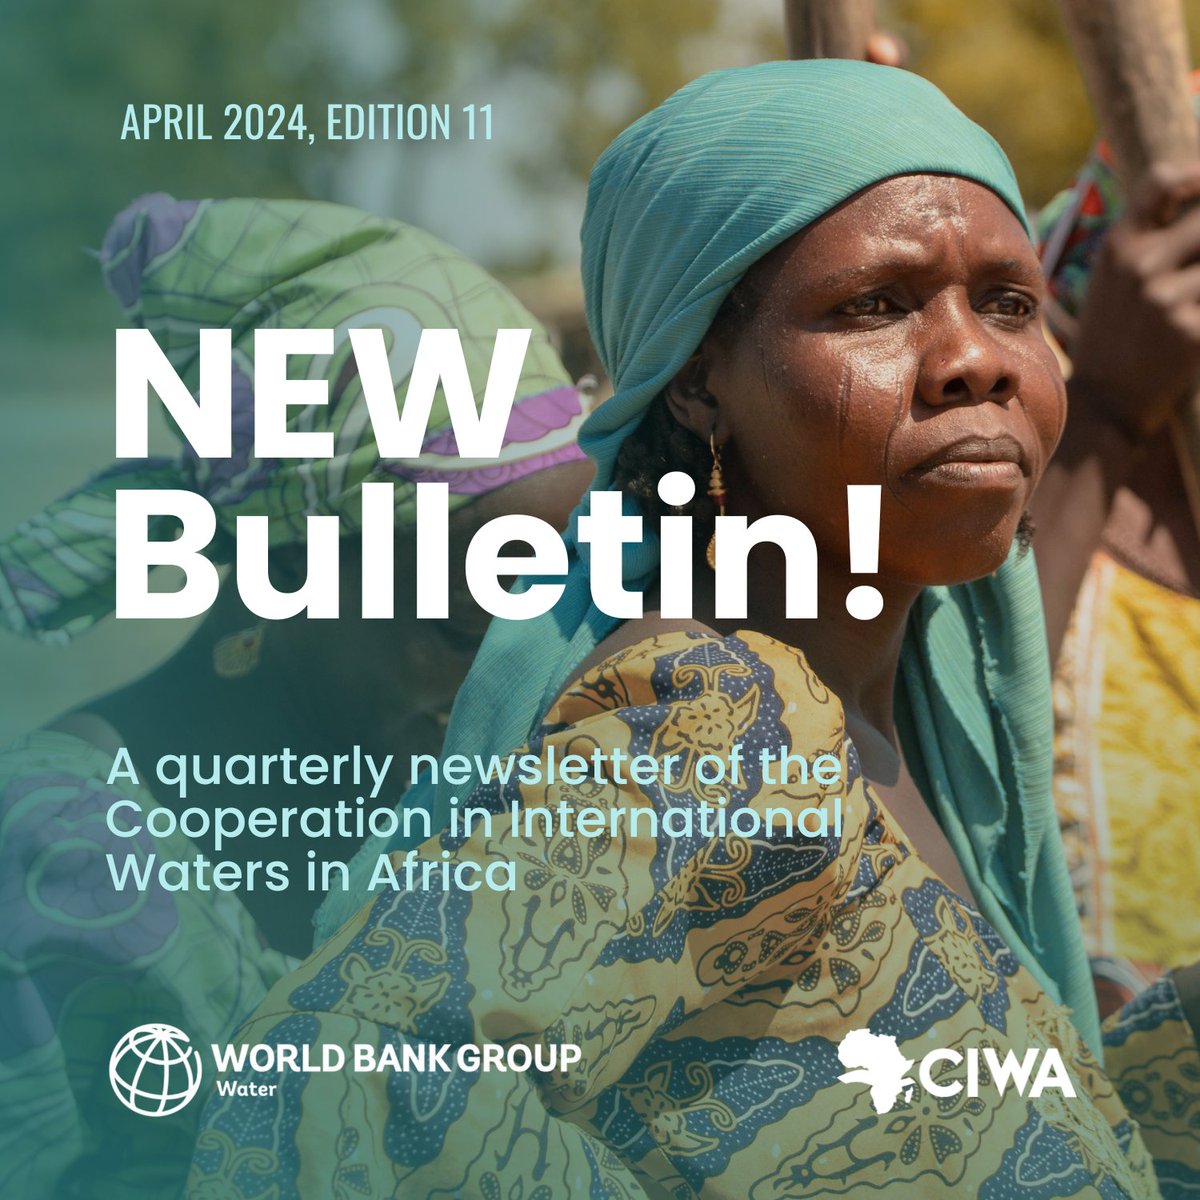 NEW @CIWAprogram Bulletin! 📰  

Check out our quarterly #newsletter of CIWA’s latest #news from the 25th anniversary of @NBIweb & #NileDay to the Women in Water Diplomacy Network event in #Vienna & celebrating #WaterForPeace on #WorldWaterDay 🕊️💧  

👉🏿 wrld.bg/SAtG50R5C7e